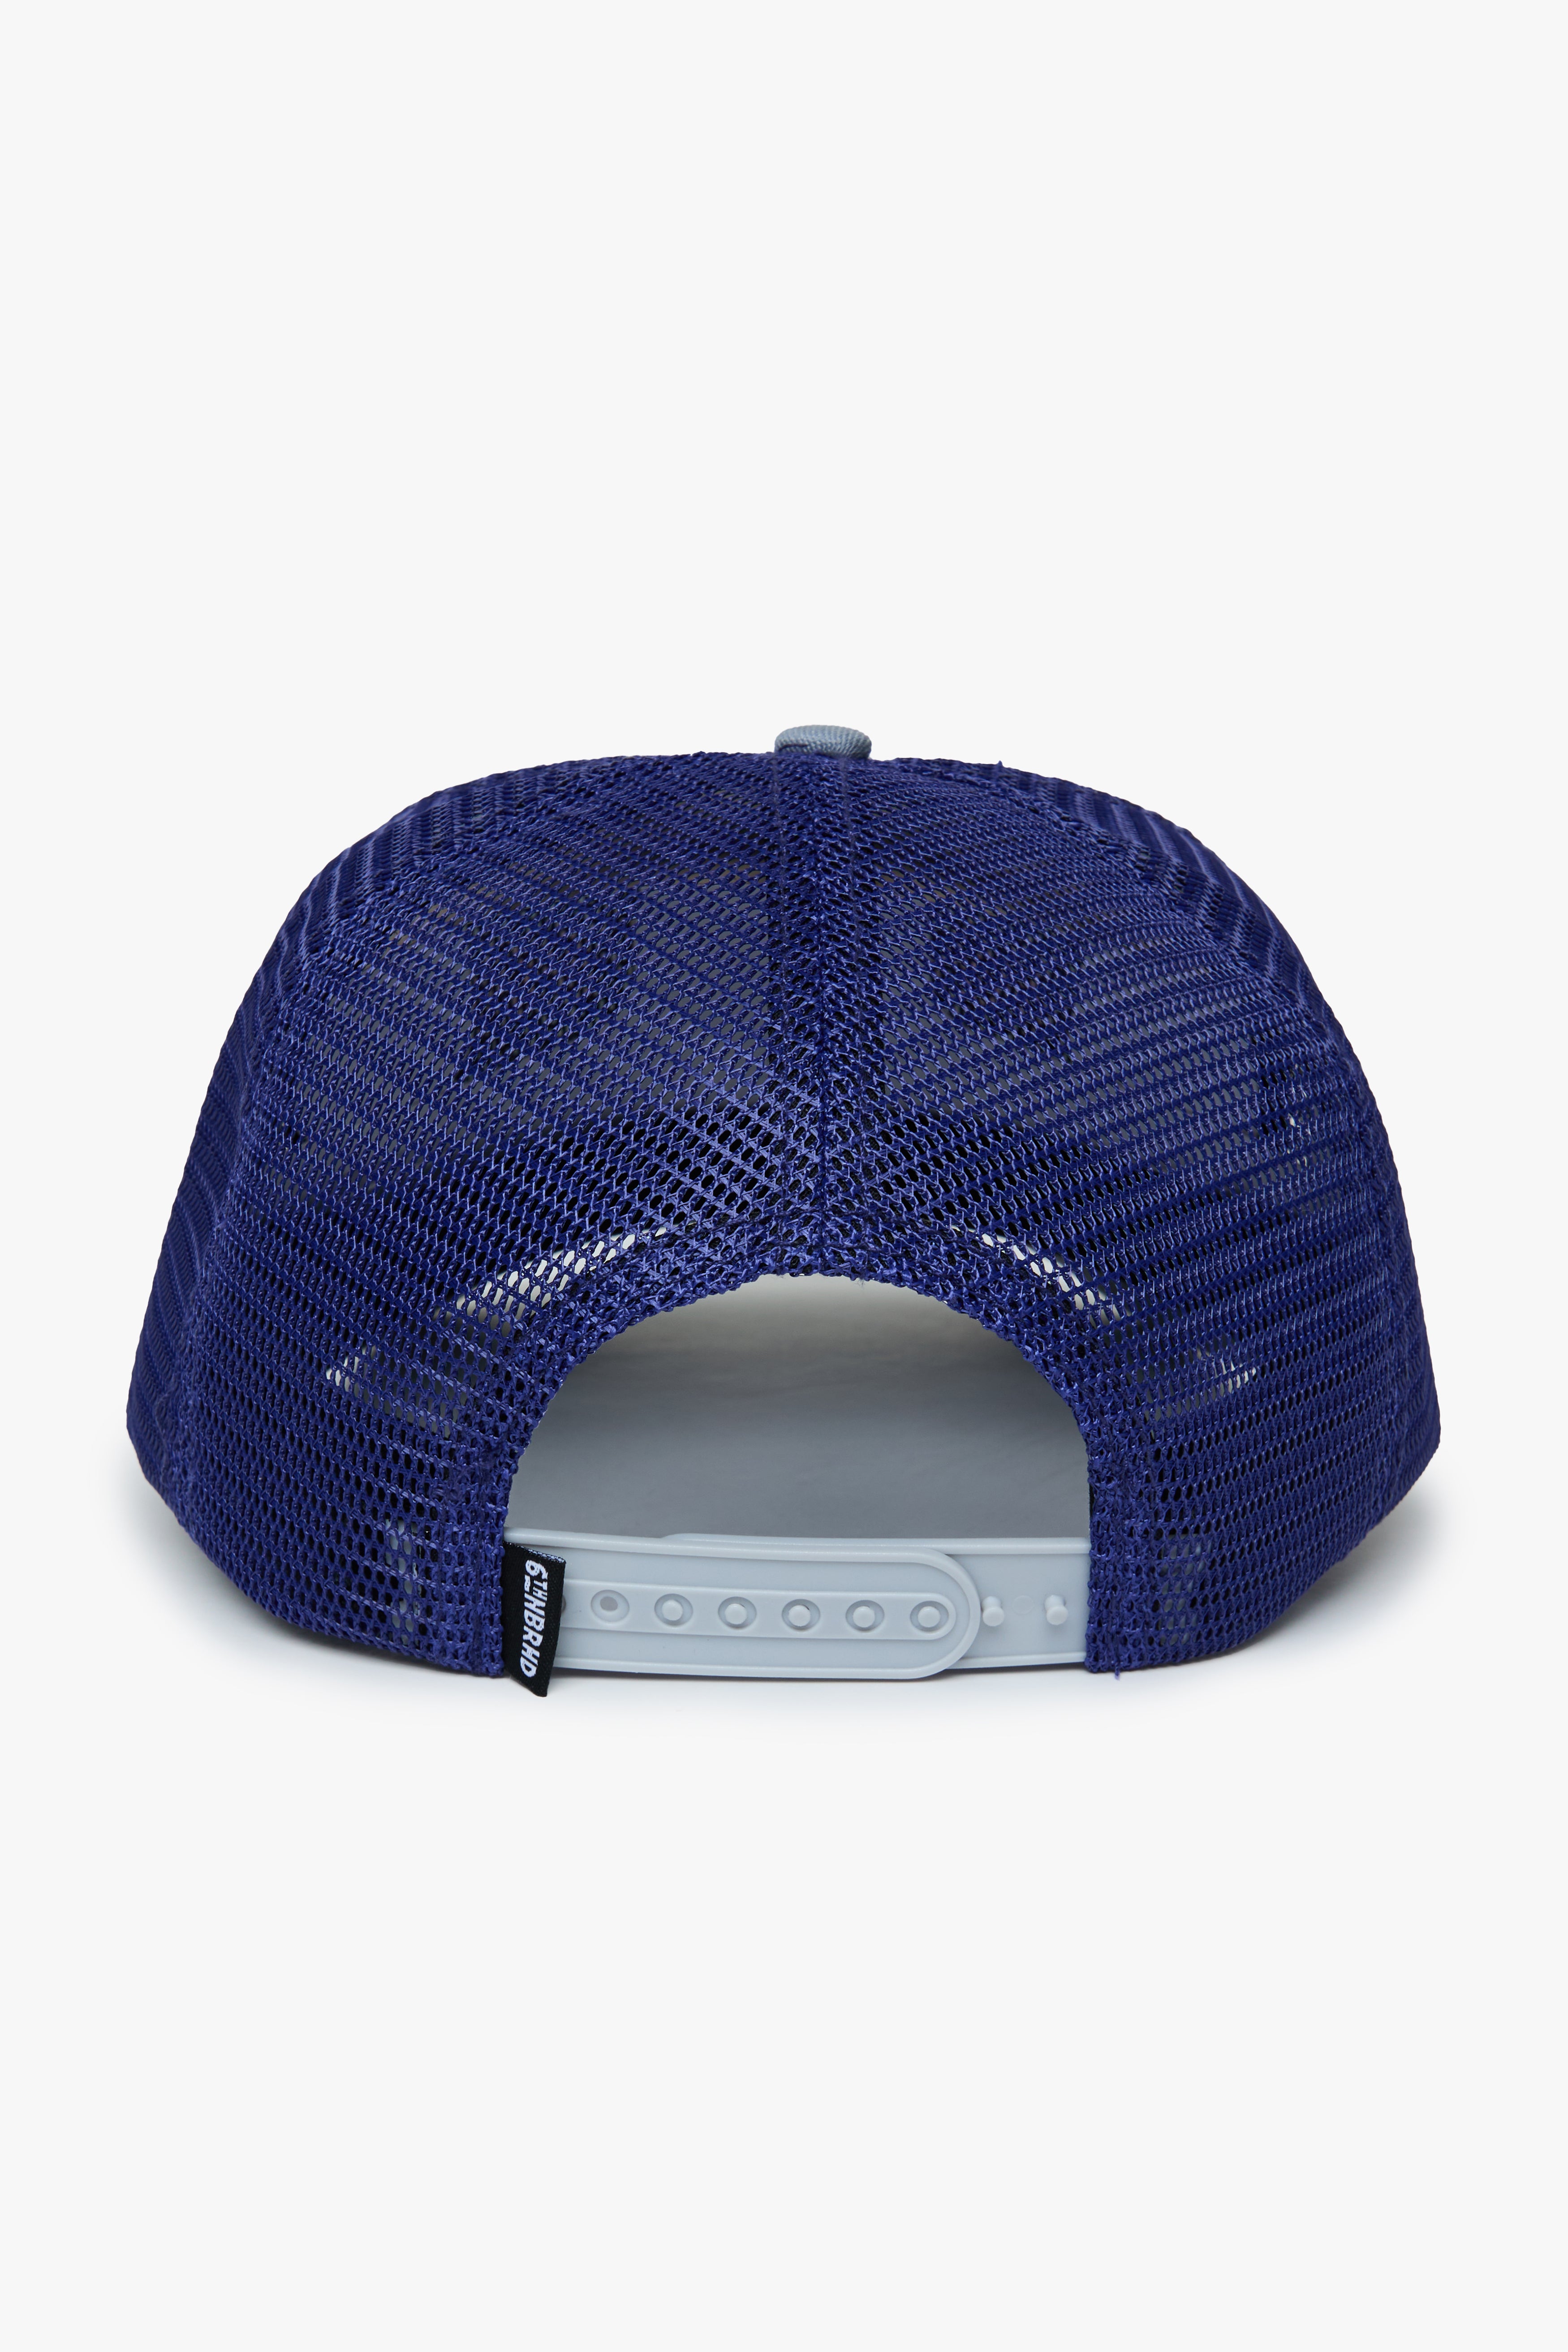 6thNBRHD HAT "OUTERLIMITS" -GRY/NVY